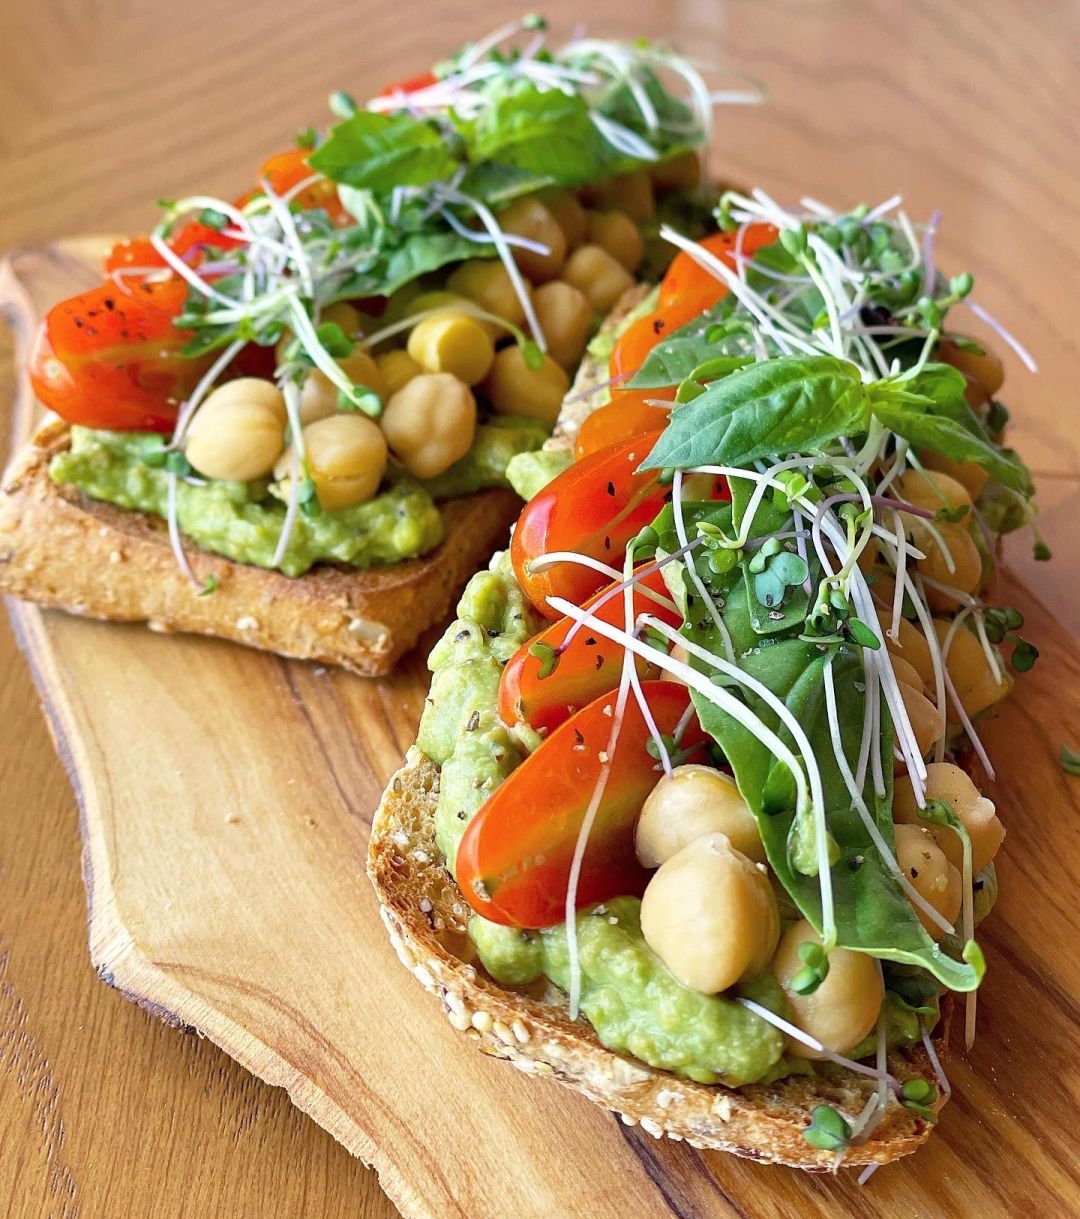 Avocado and tomato toast at Summer Tap.